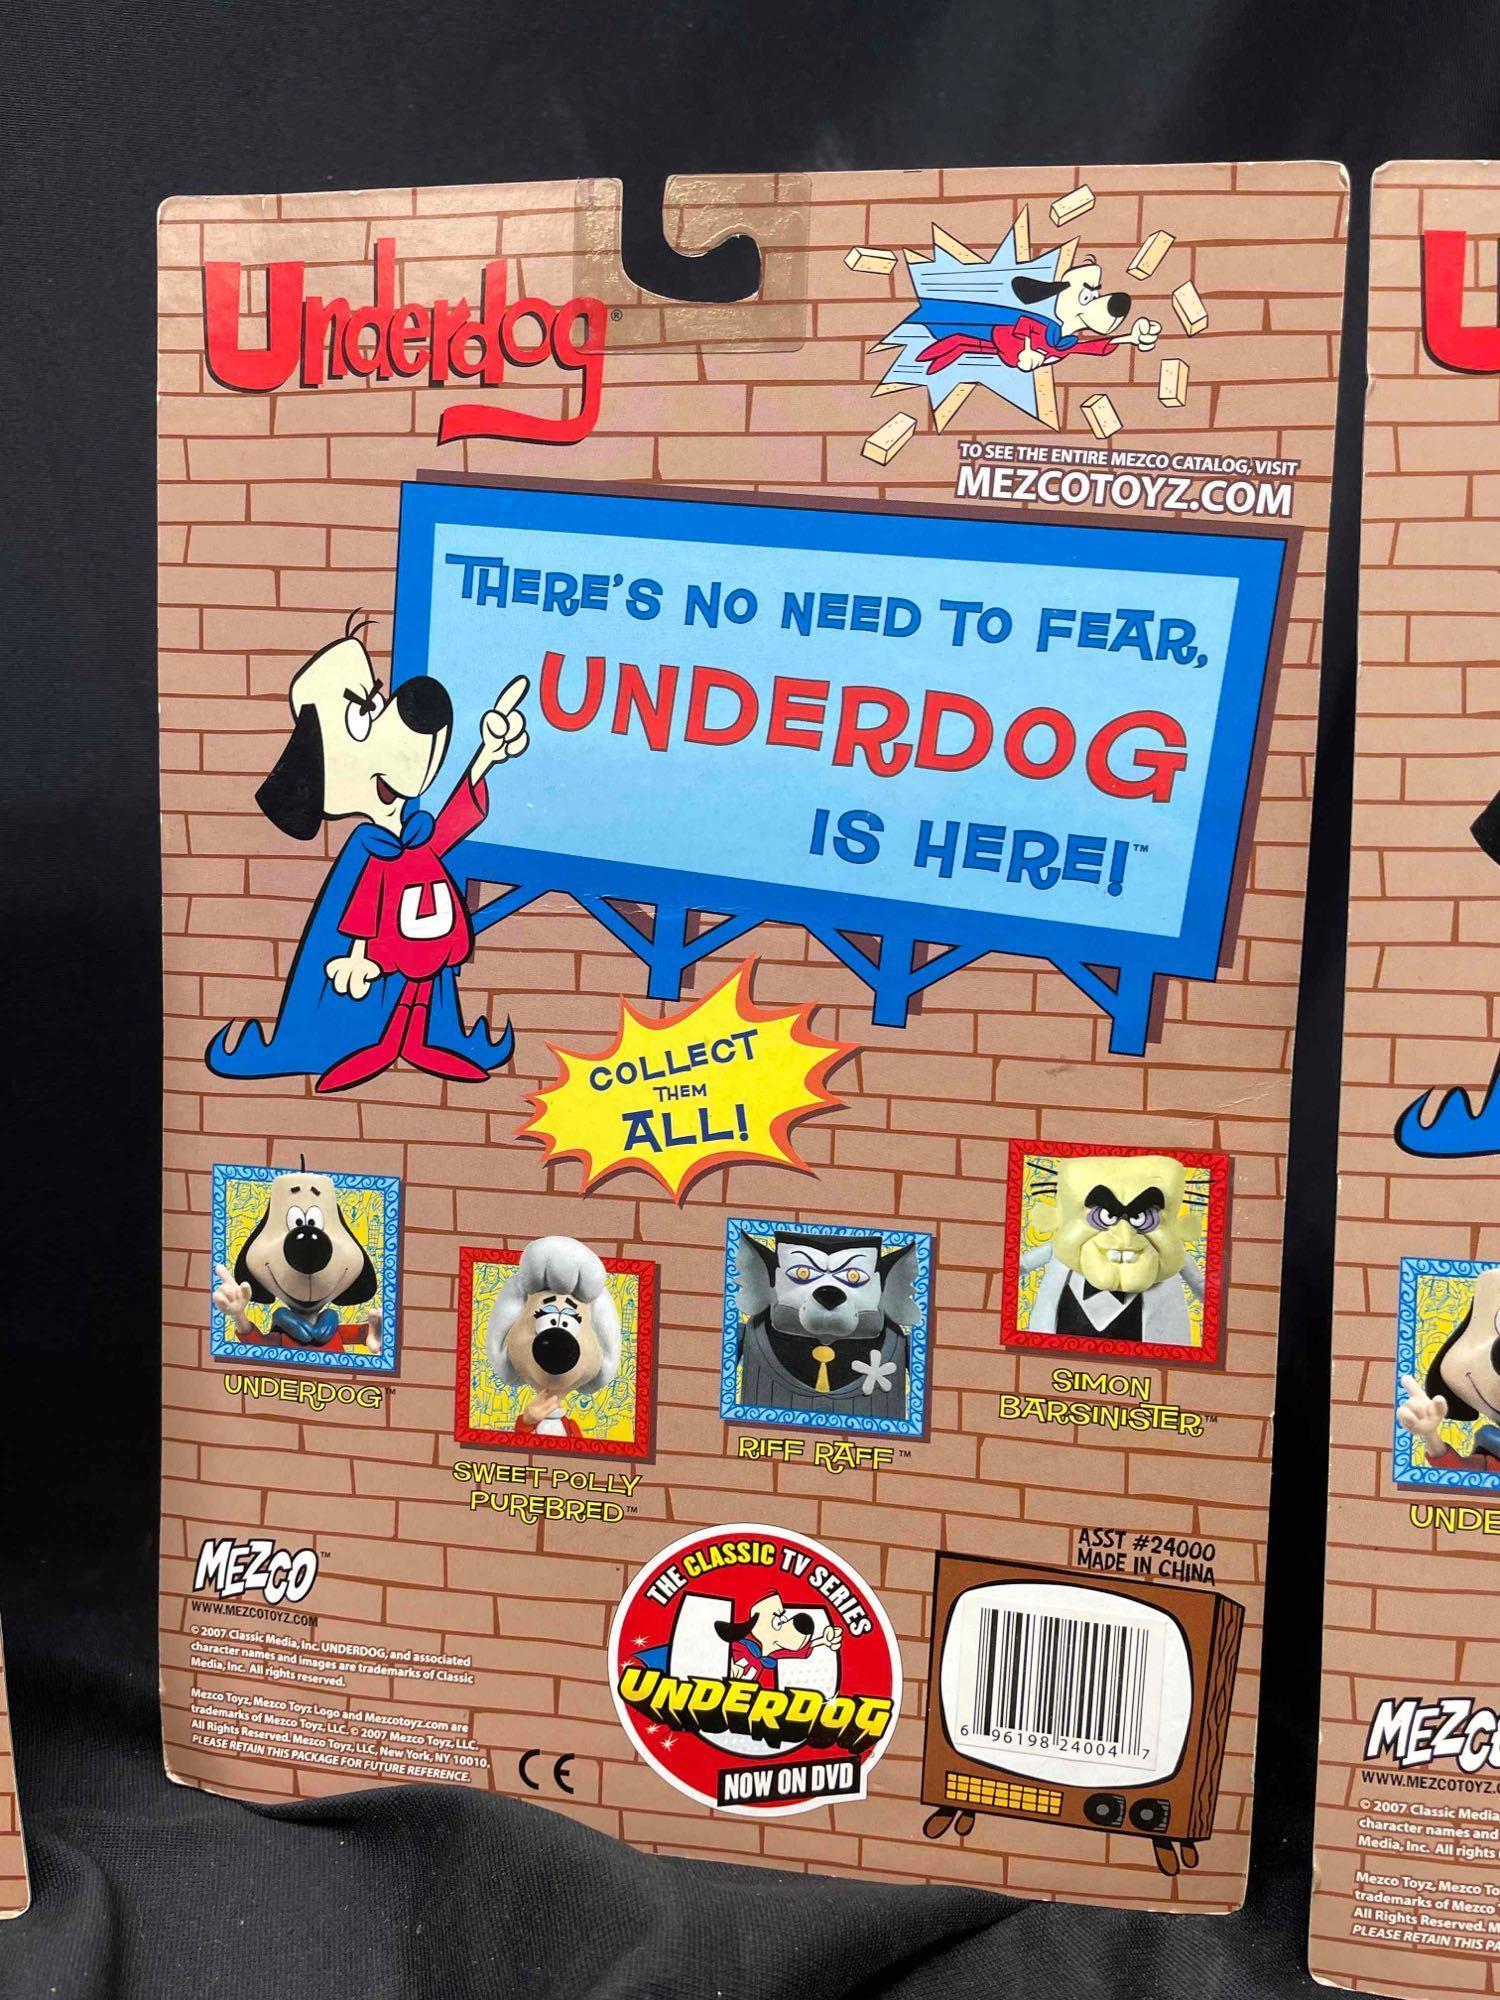 Underdog Action Figures by Mezco Toys. Riff Raff, Simon Barsinister, Sweet Polly Purebread